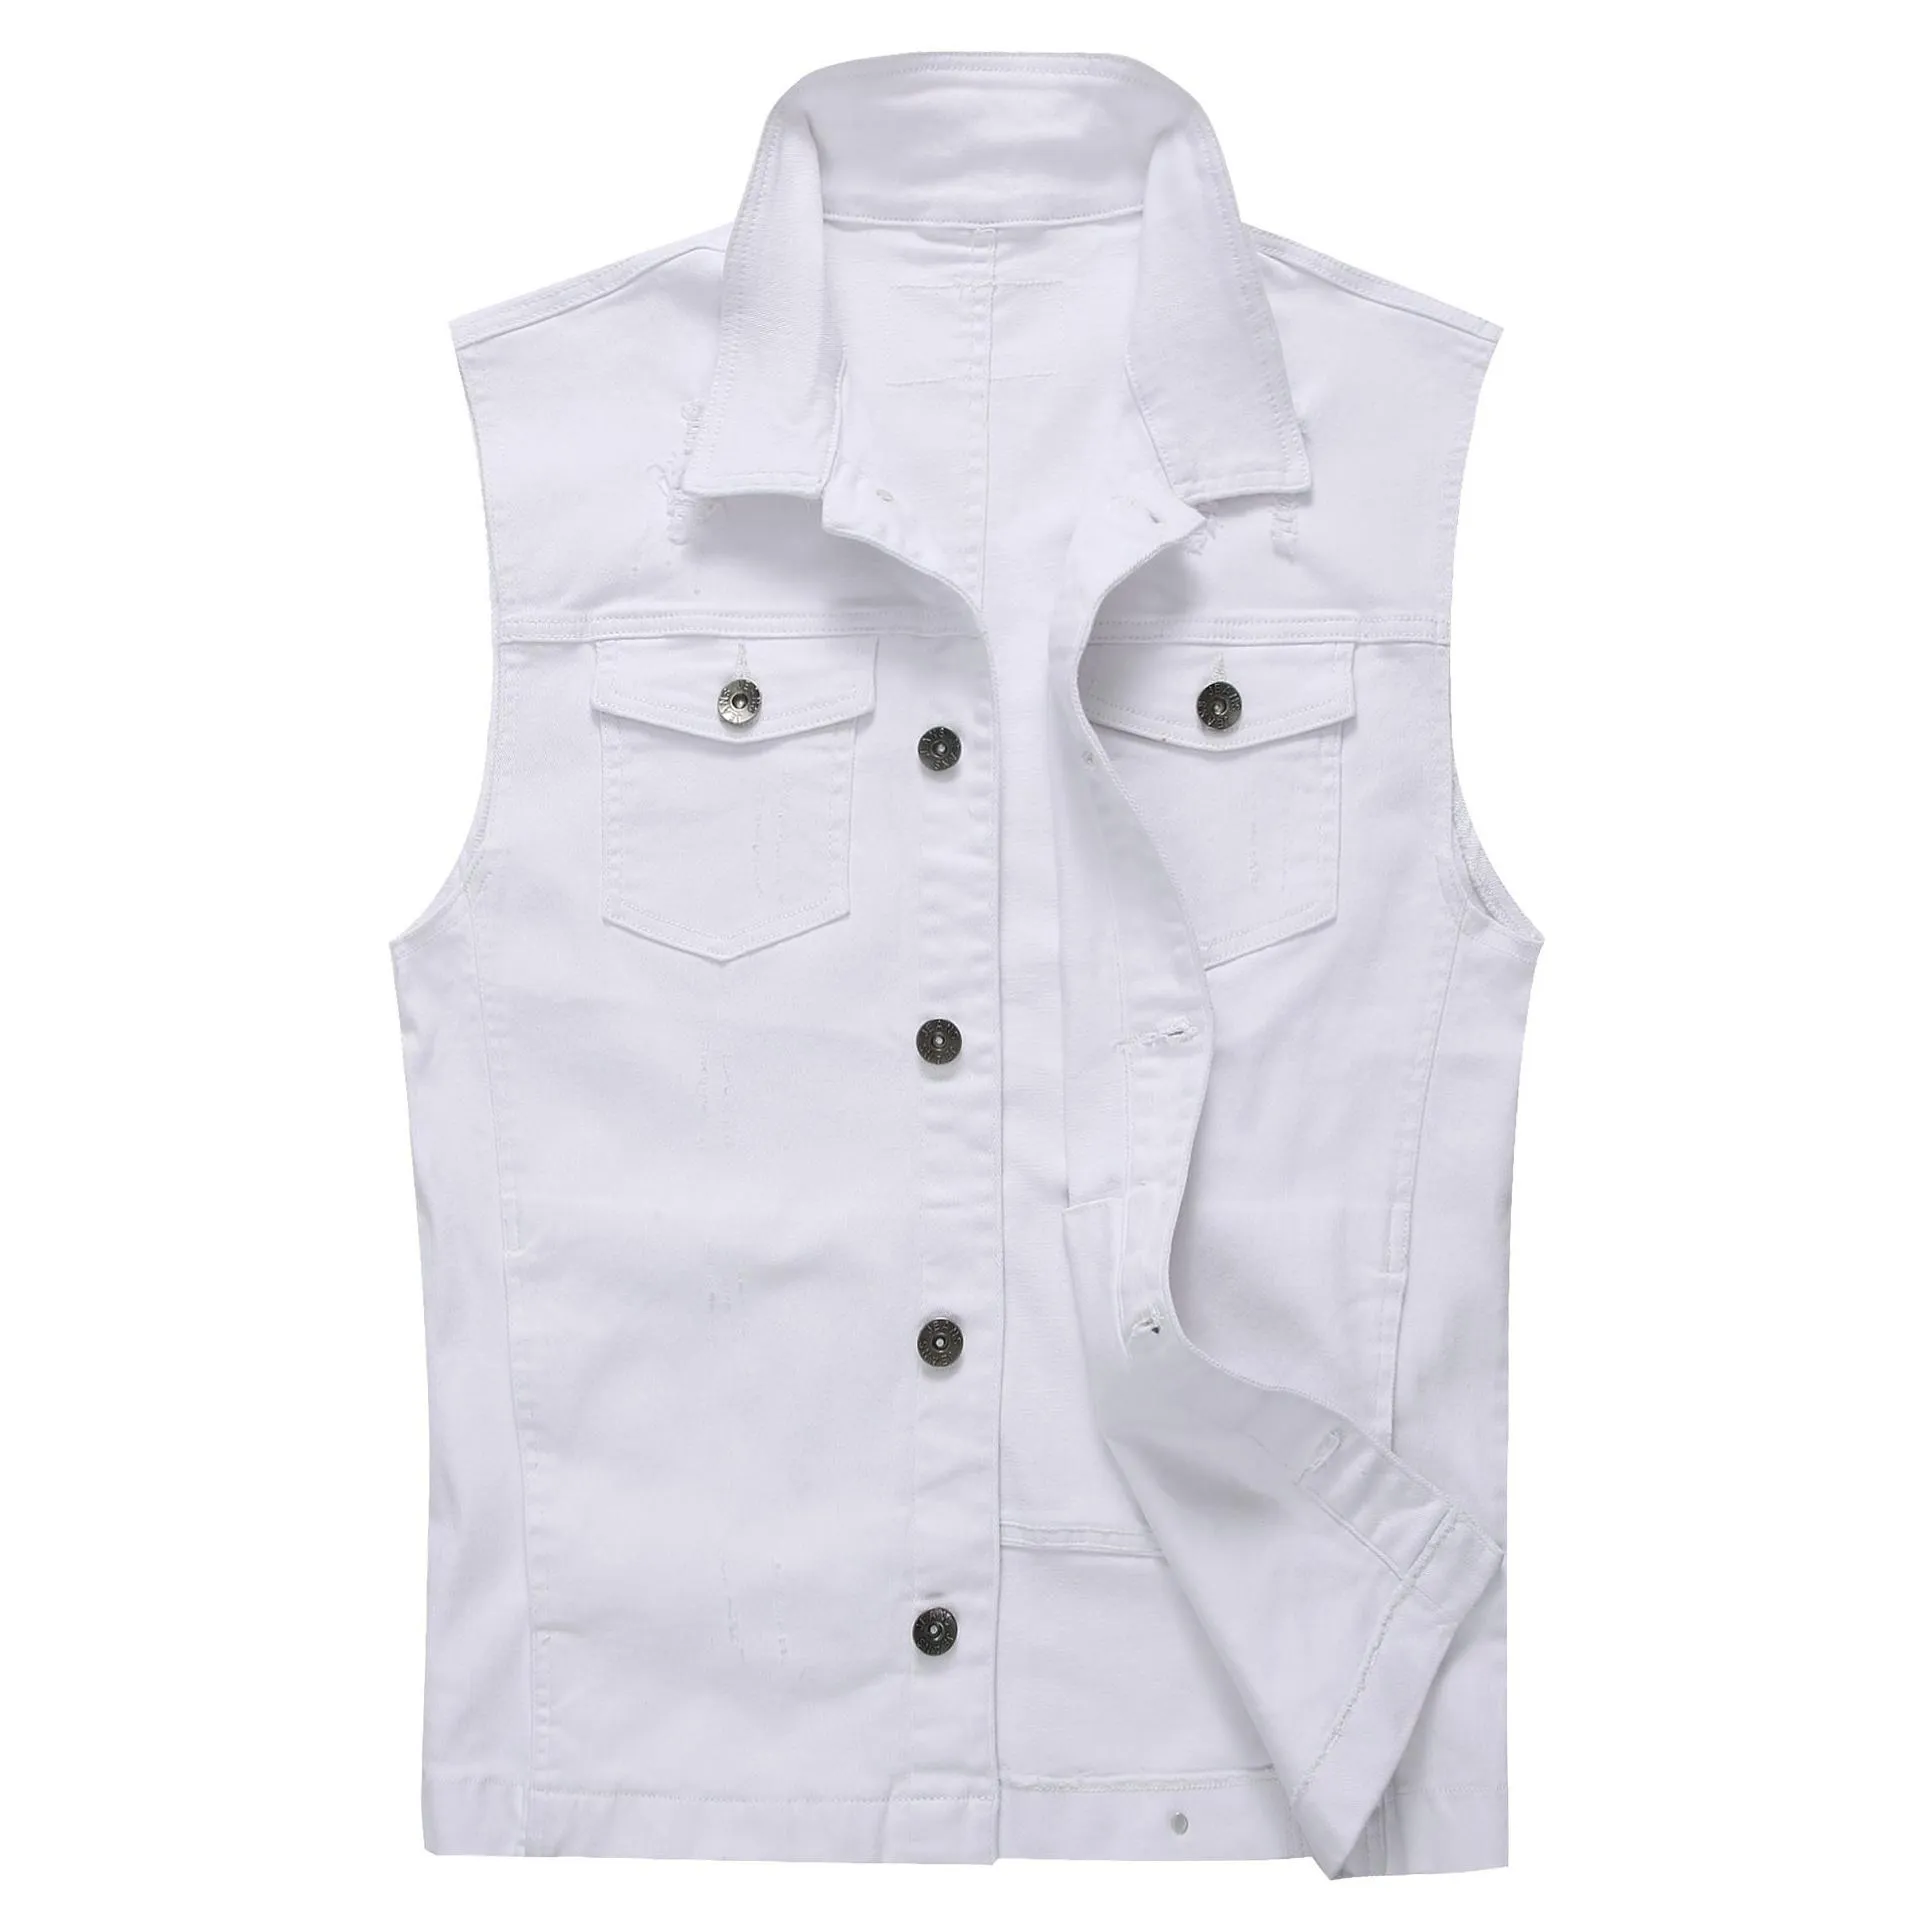 mens vests mens denim vest simple fashion washed grinding white hole slim youth motorcycle foreign trade wholesale